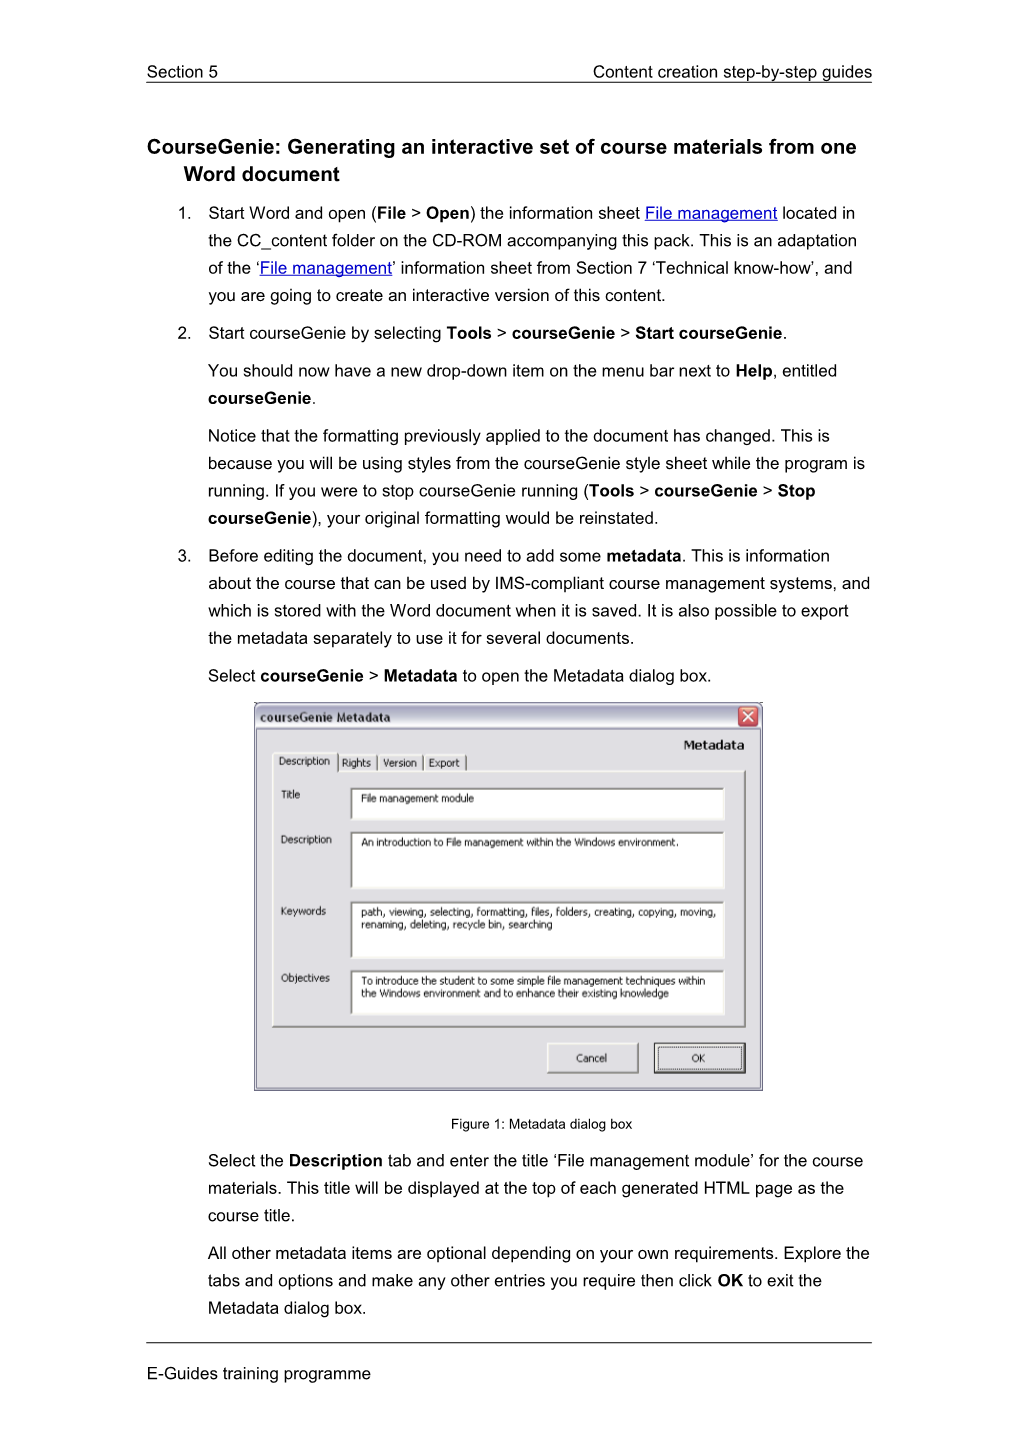 Coursegenie: Generating an Interactive Set of Course Materials from One Word Document